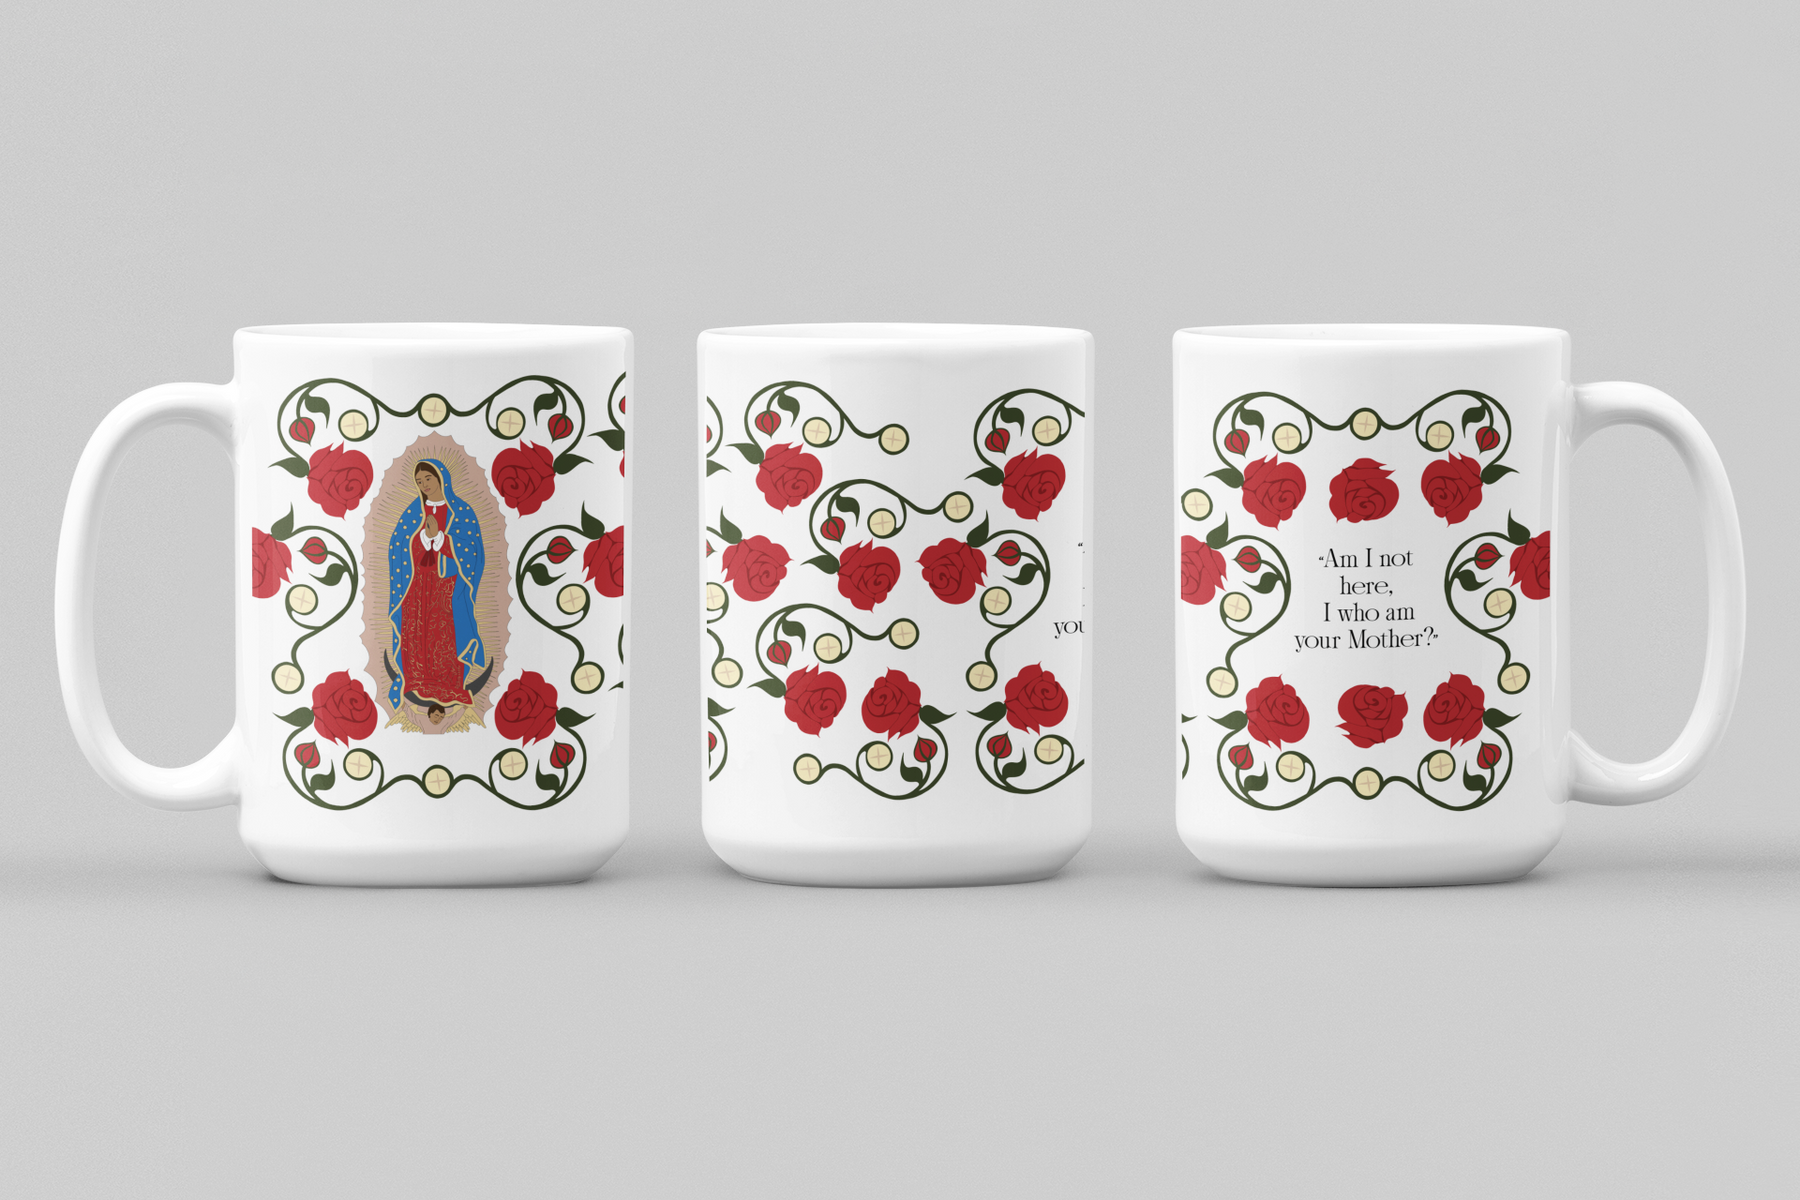 Our Lady of Guadalupe & The Eucharist Mug